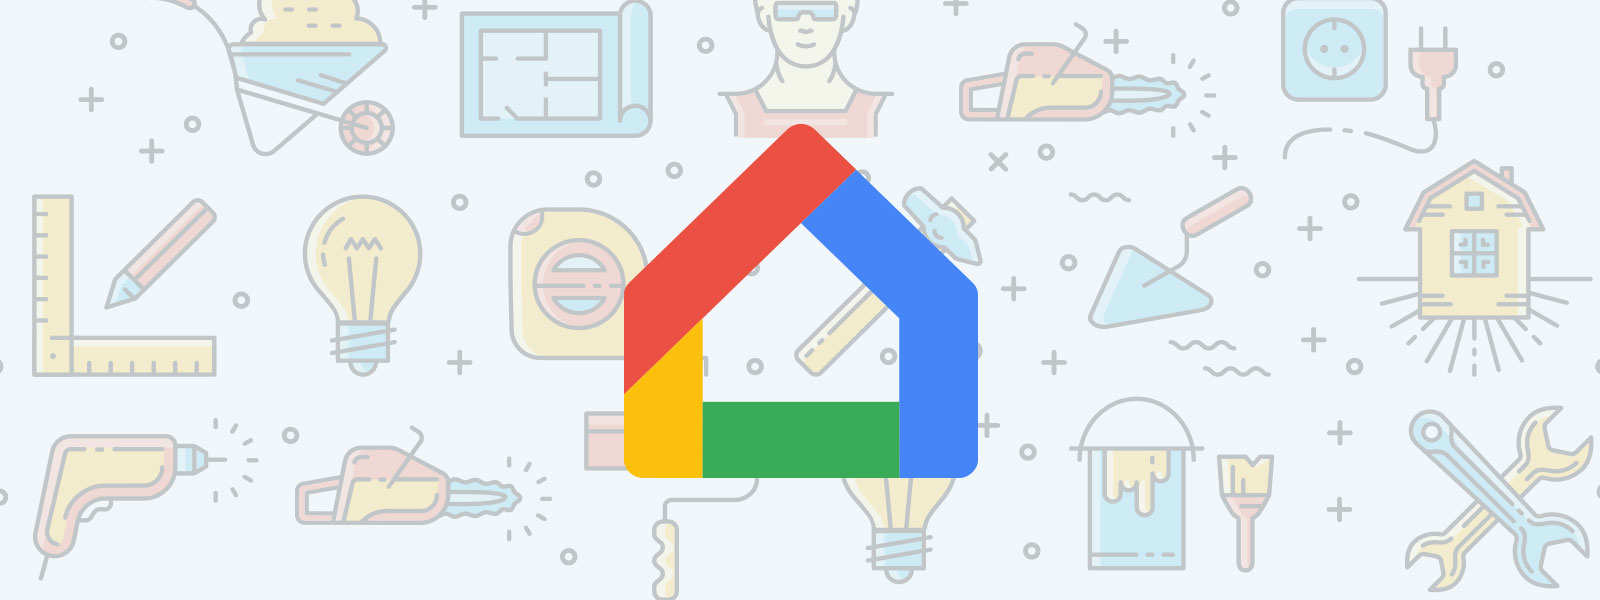 google home search logo background